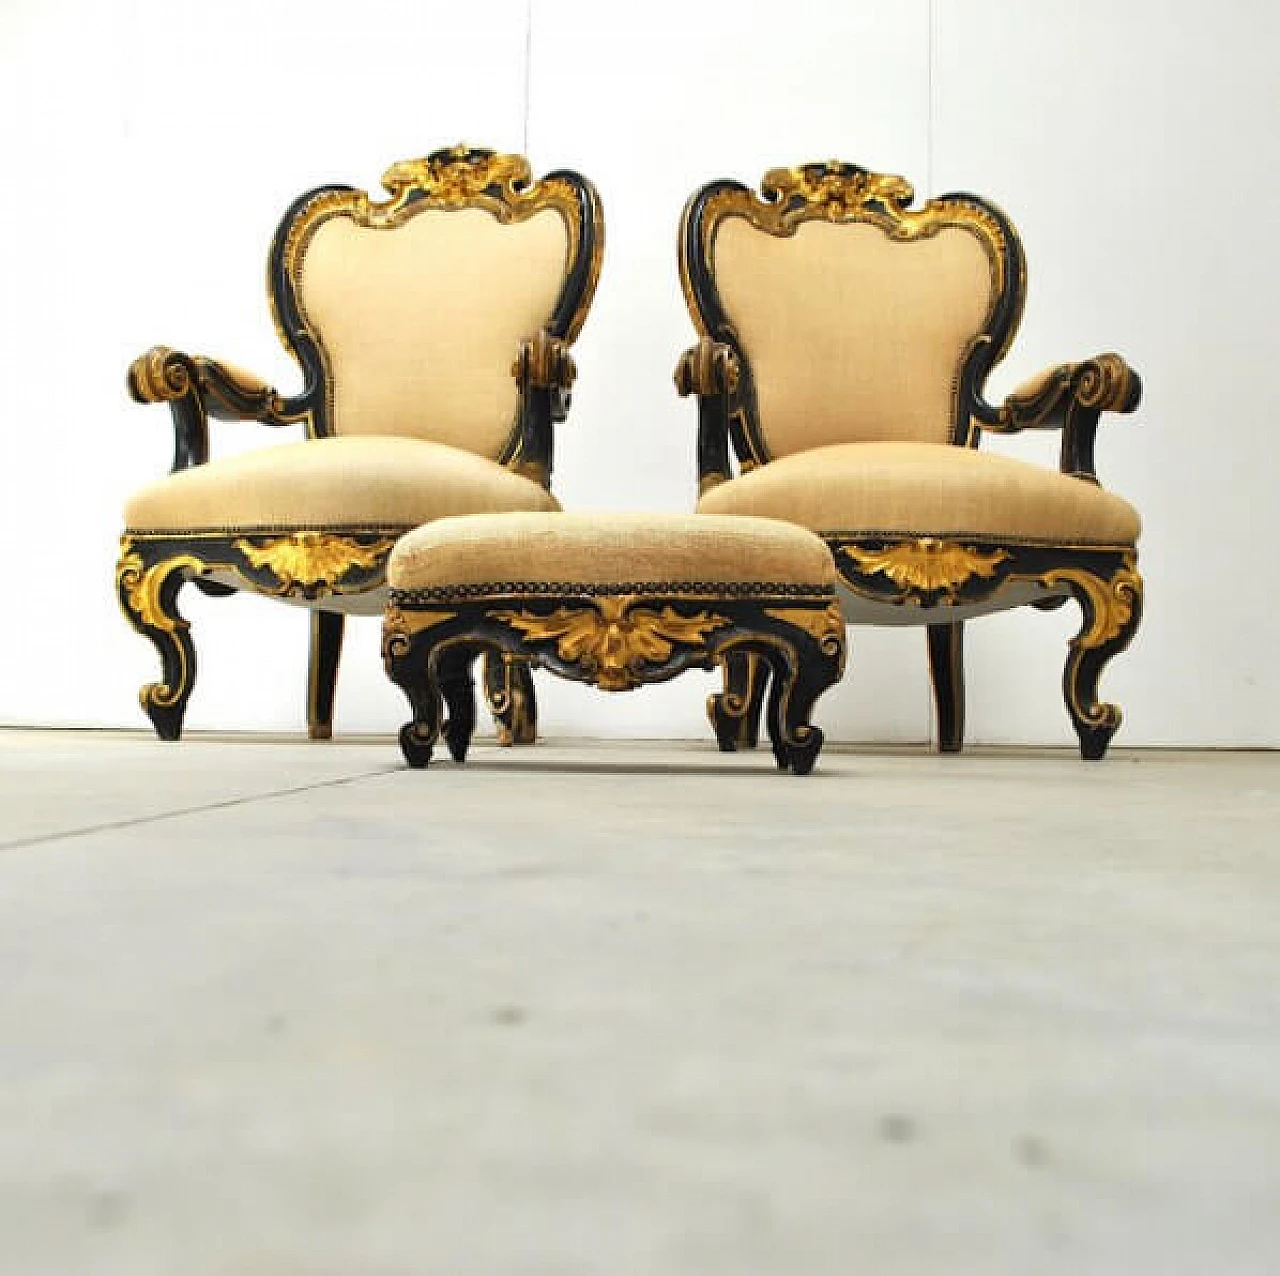 Pair of armchairs and footstool in wood and fabric, 19th century 1221269